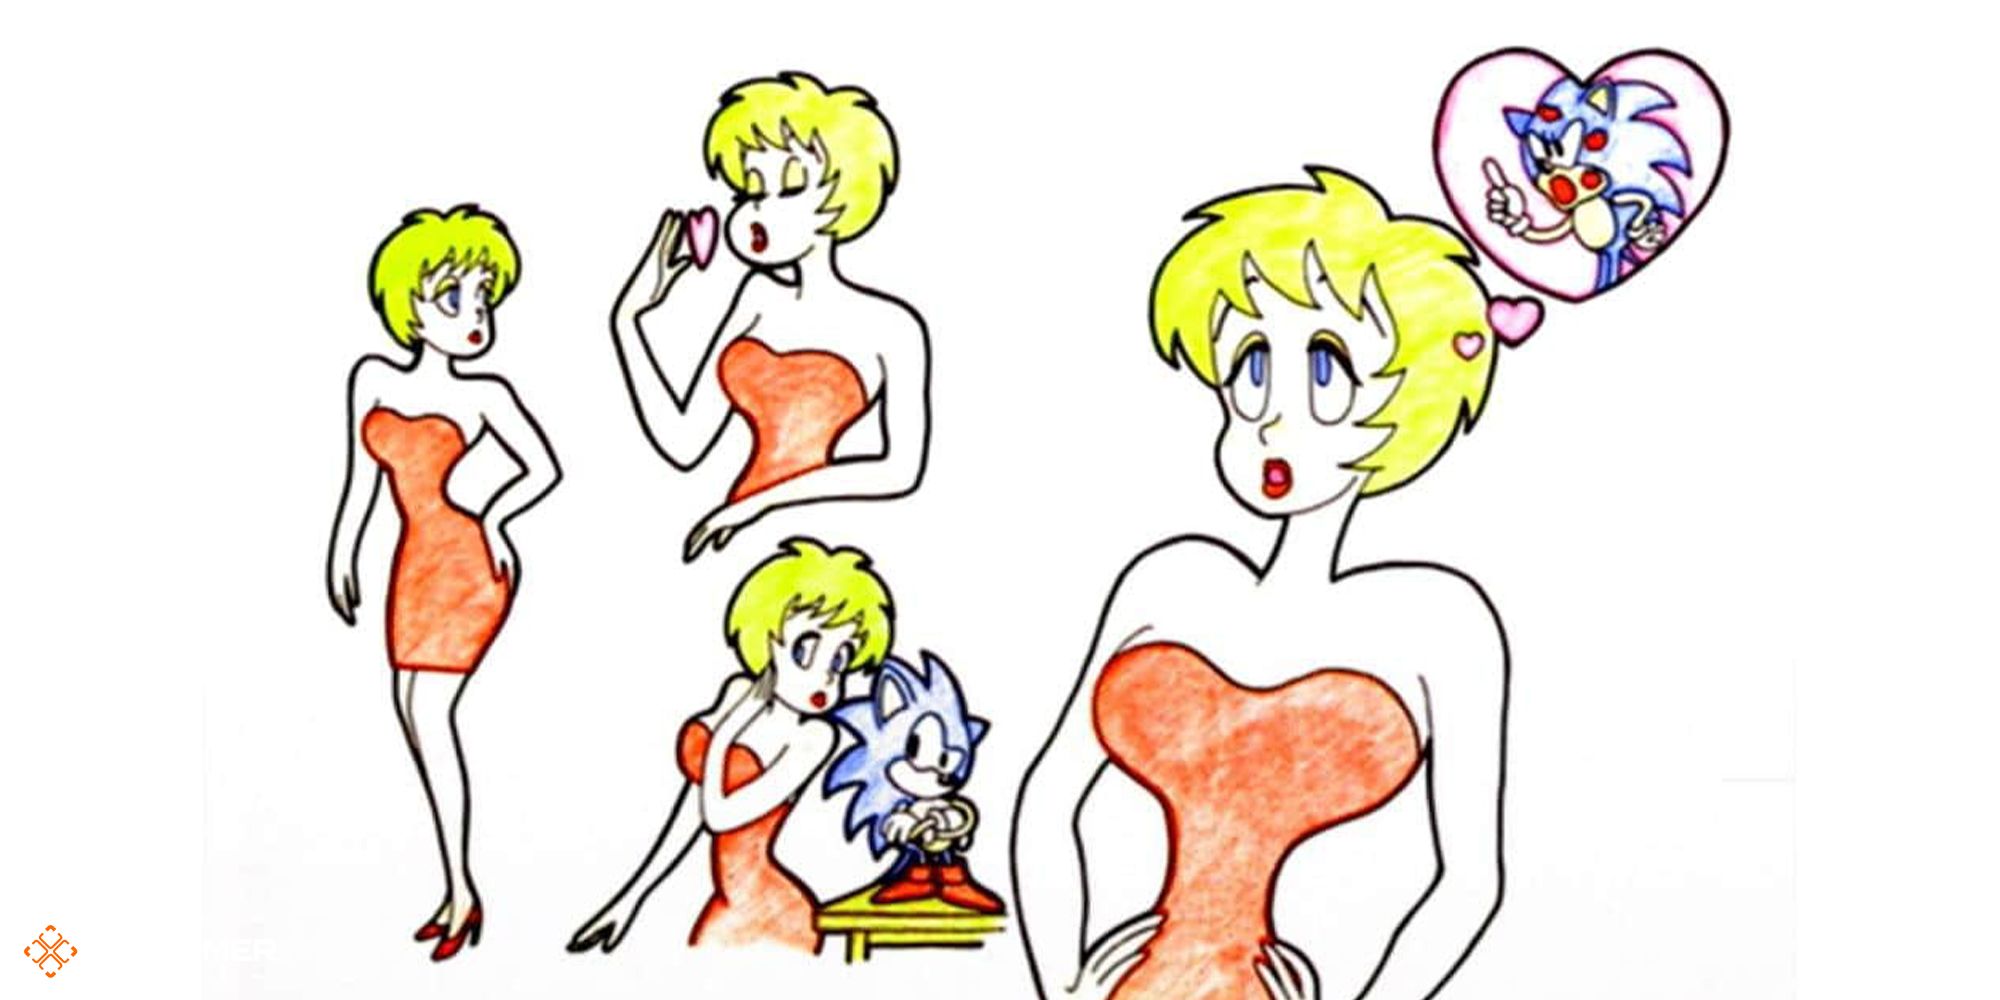 Drawings of Madonna speaking and thinking about Sonic.